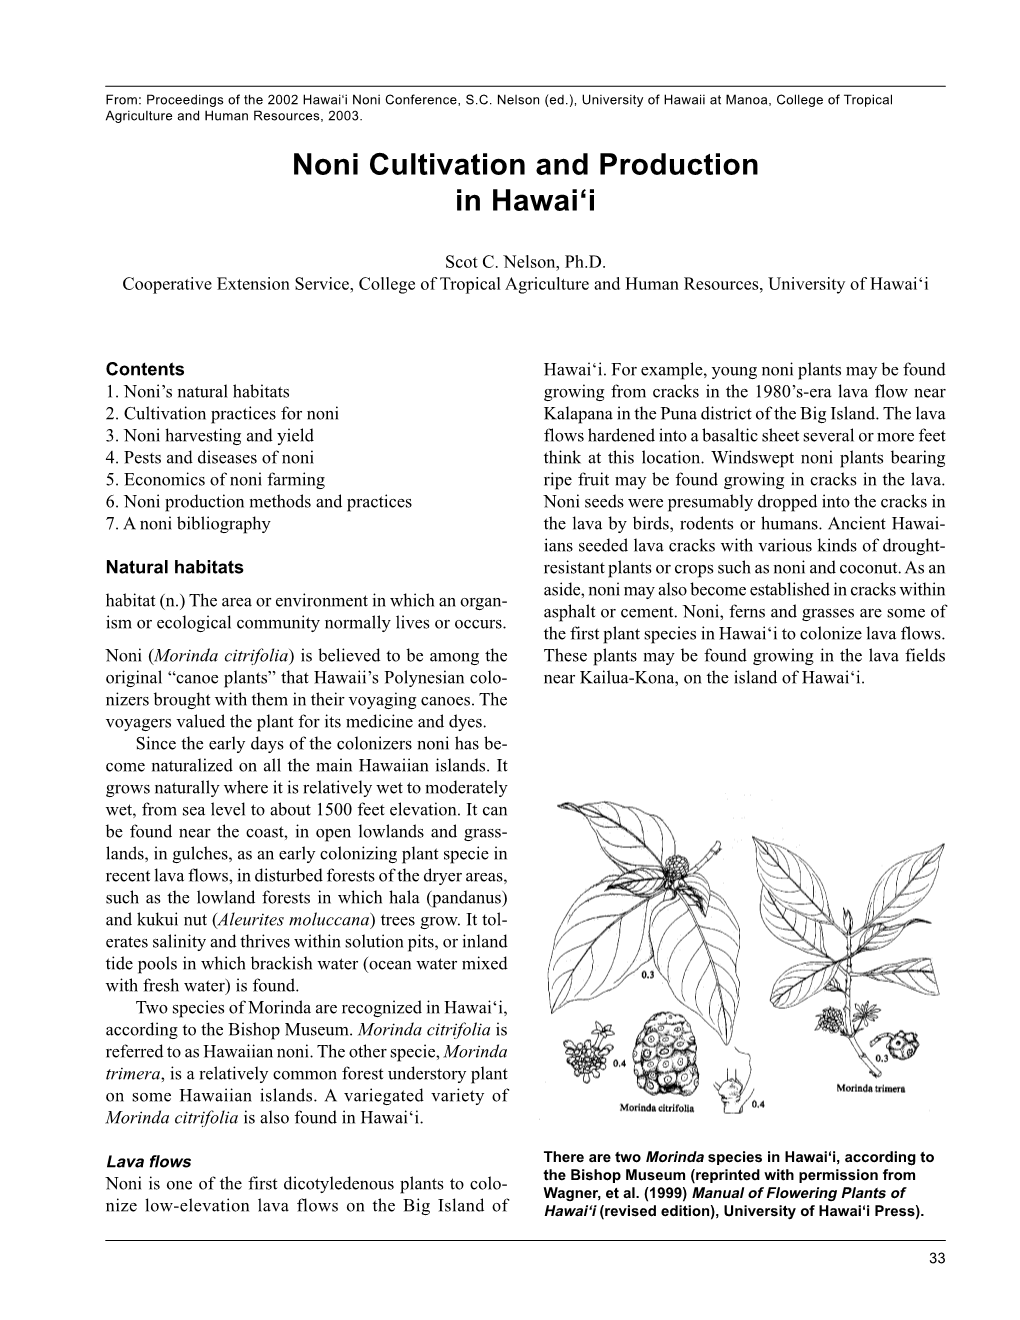 Noni Cultivation and Production in Hawai'i